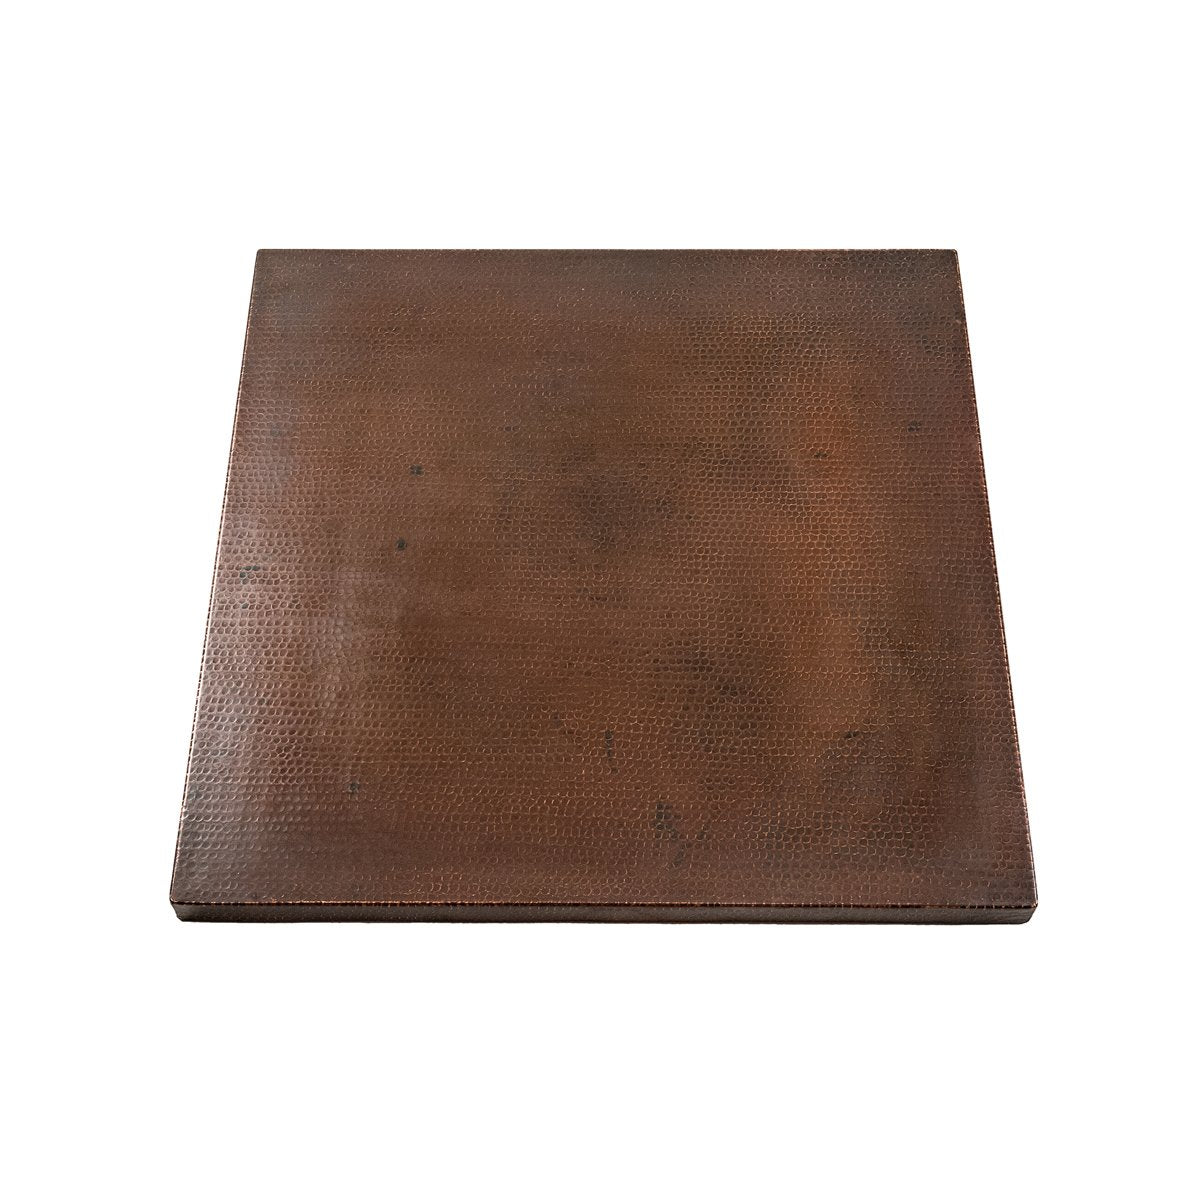 Premier Copper Products Square Hammered Copper Table Top